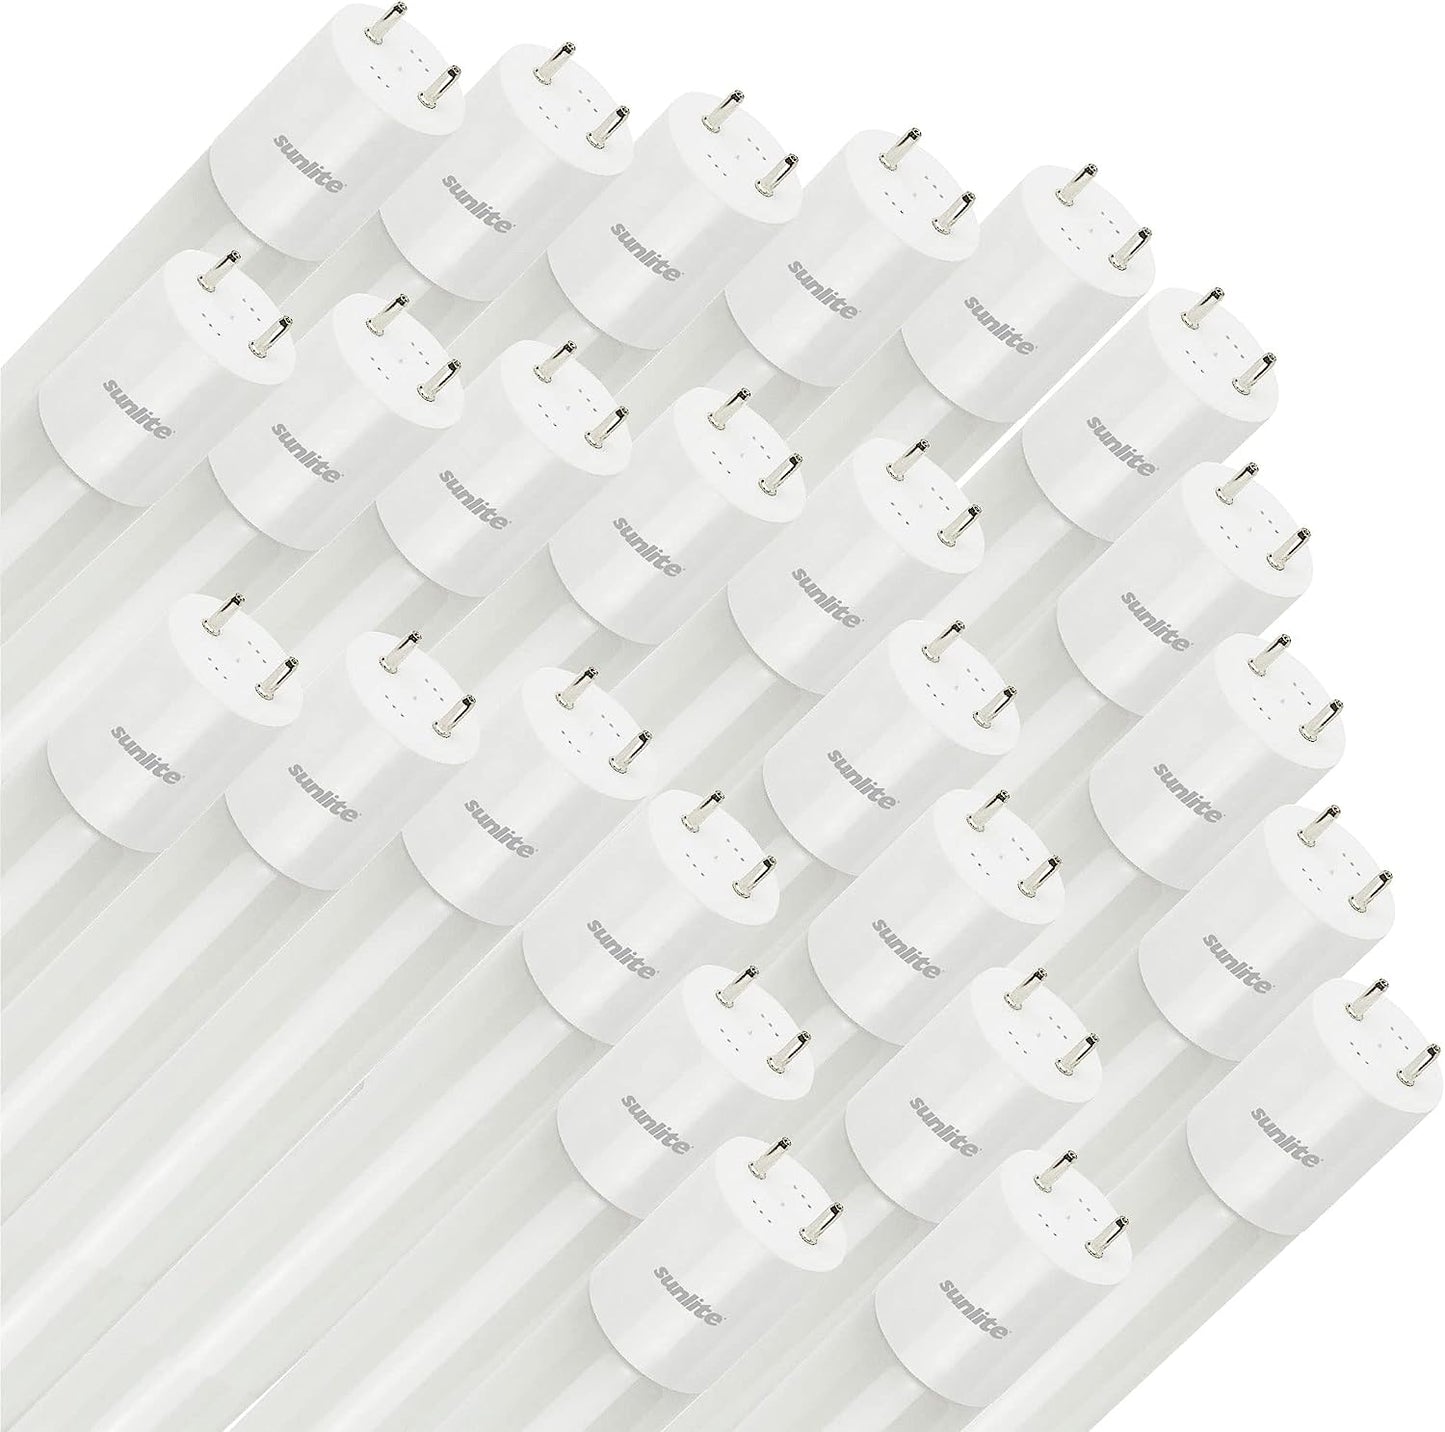 Sunlite 88433 LED T8 Ballast Bypass Light Tube (Type B) 4 Foot, 14W (F32T8 Equal), 1700 Lm, Medium G13 Base, Dual End Connection, Frosted, UL Listed, 3000K Warm White, 25 Count